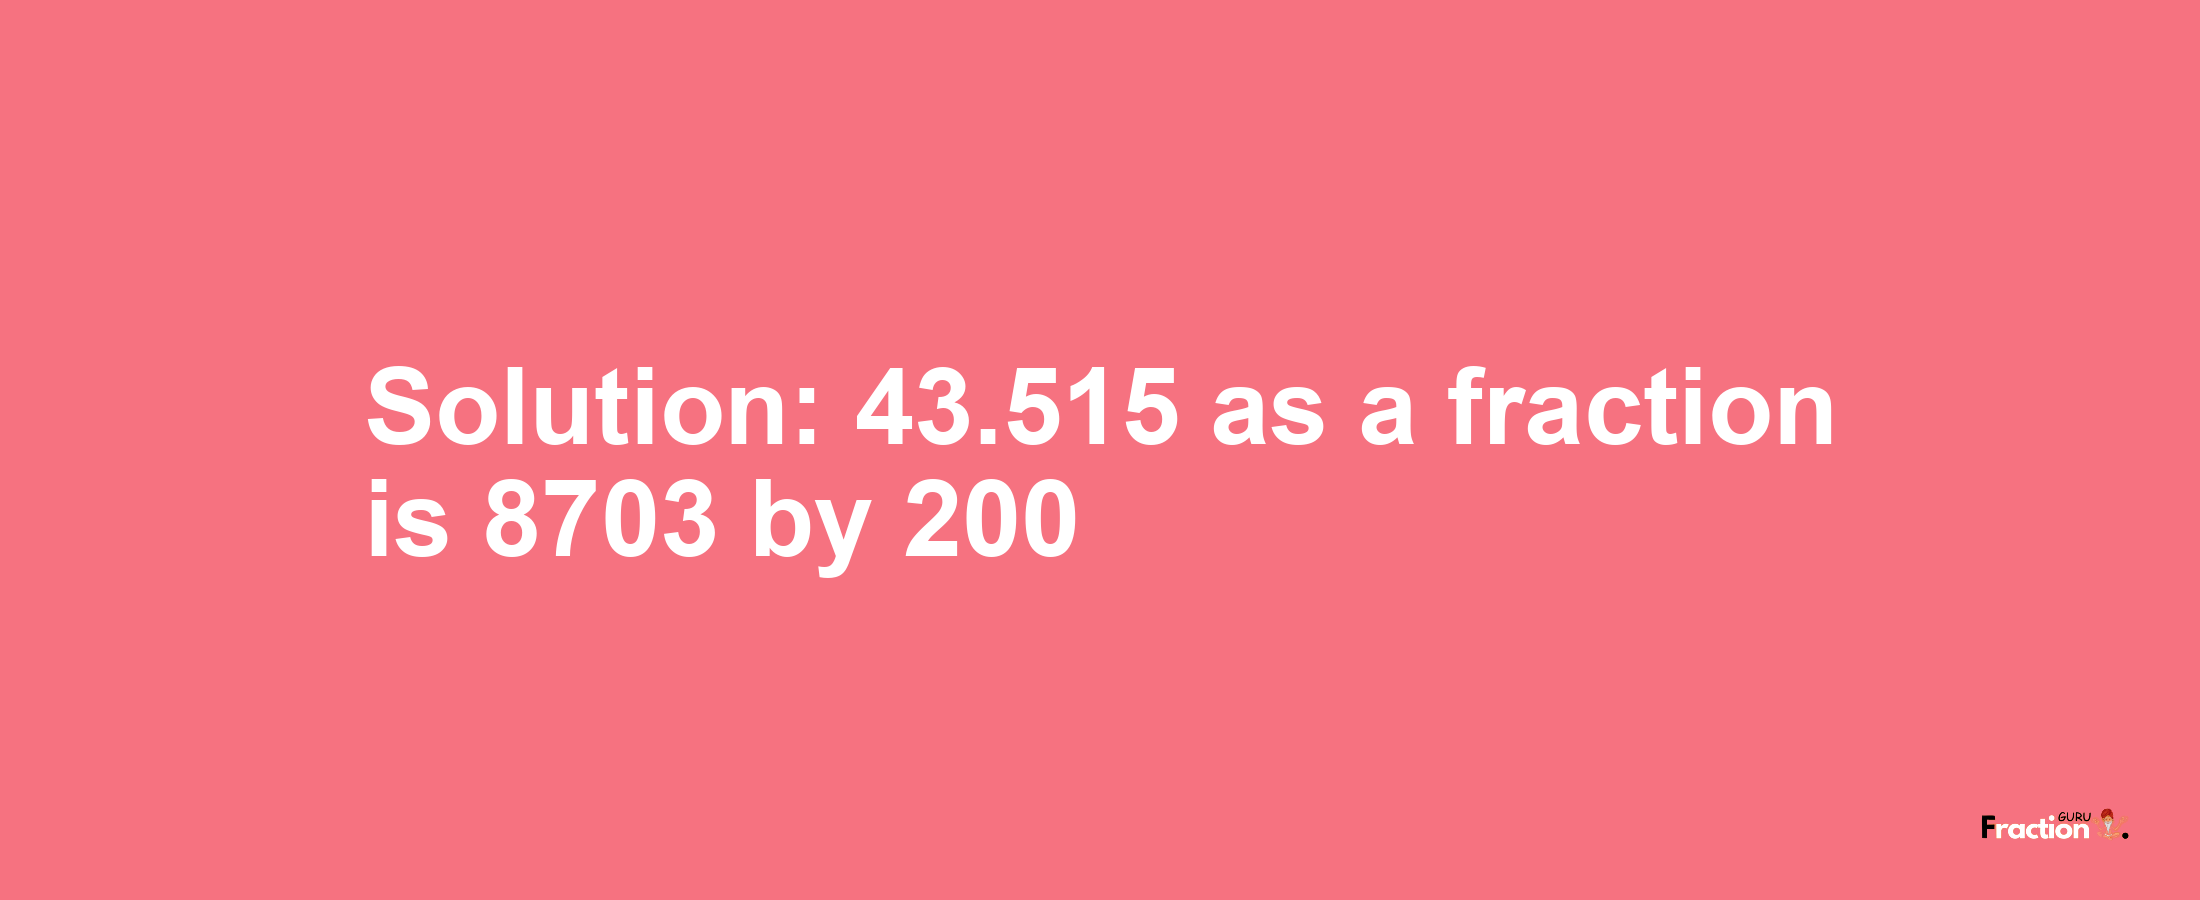 Solution:43.515 as a fraction is 8703/200